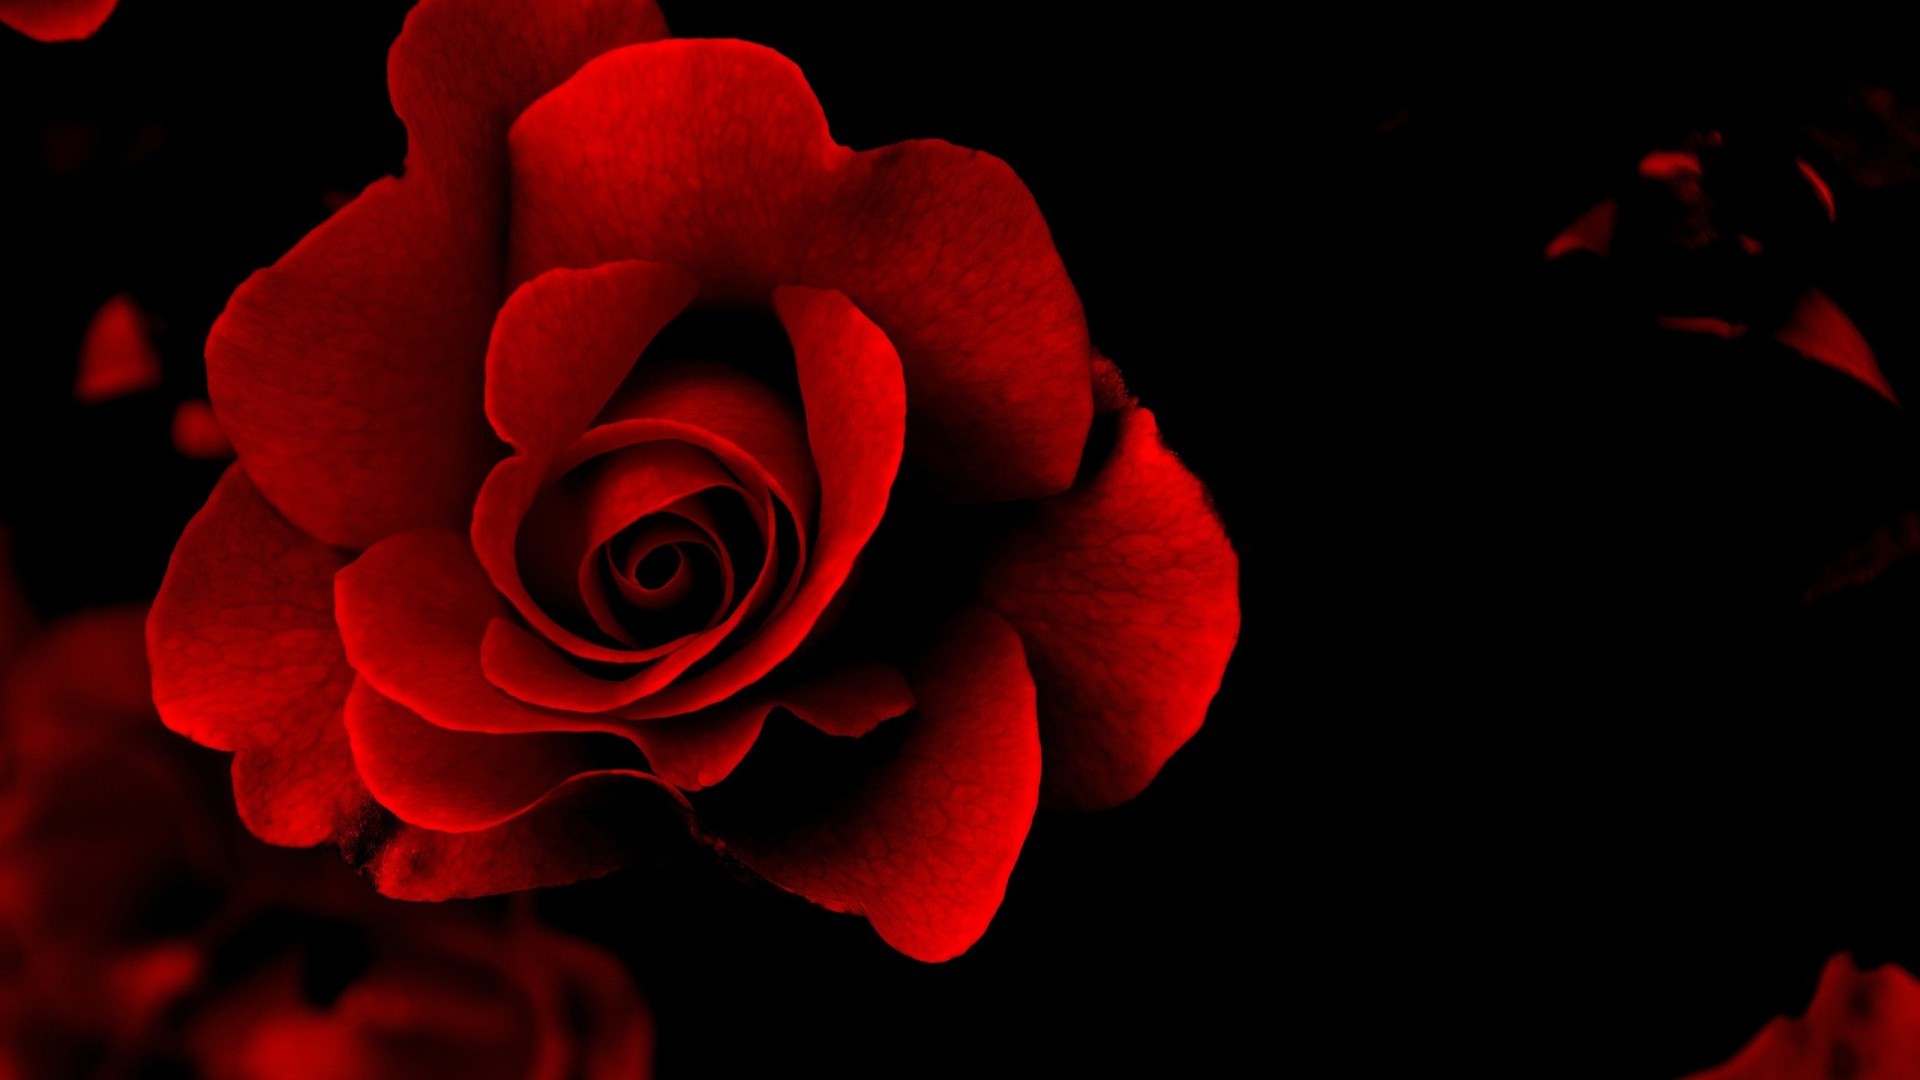 Red Rose with Black Background (42+ images)